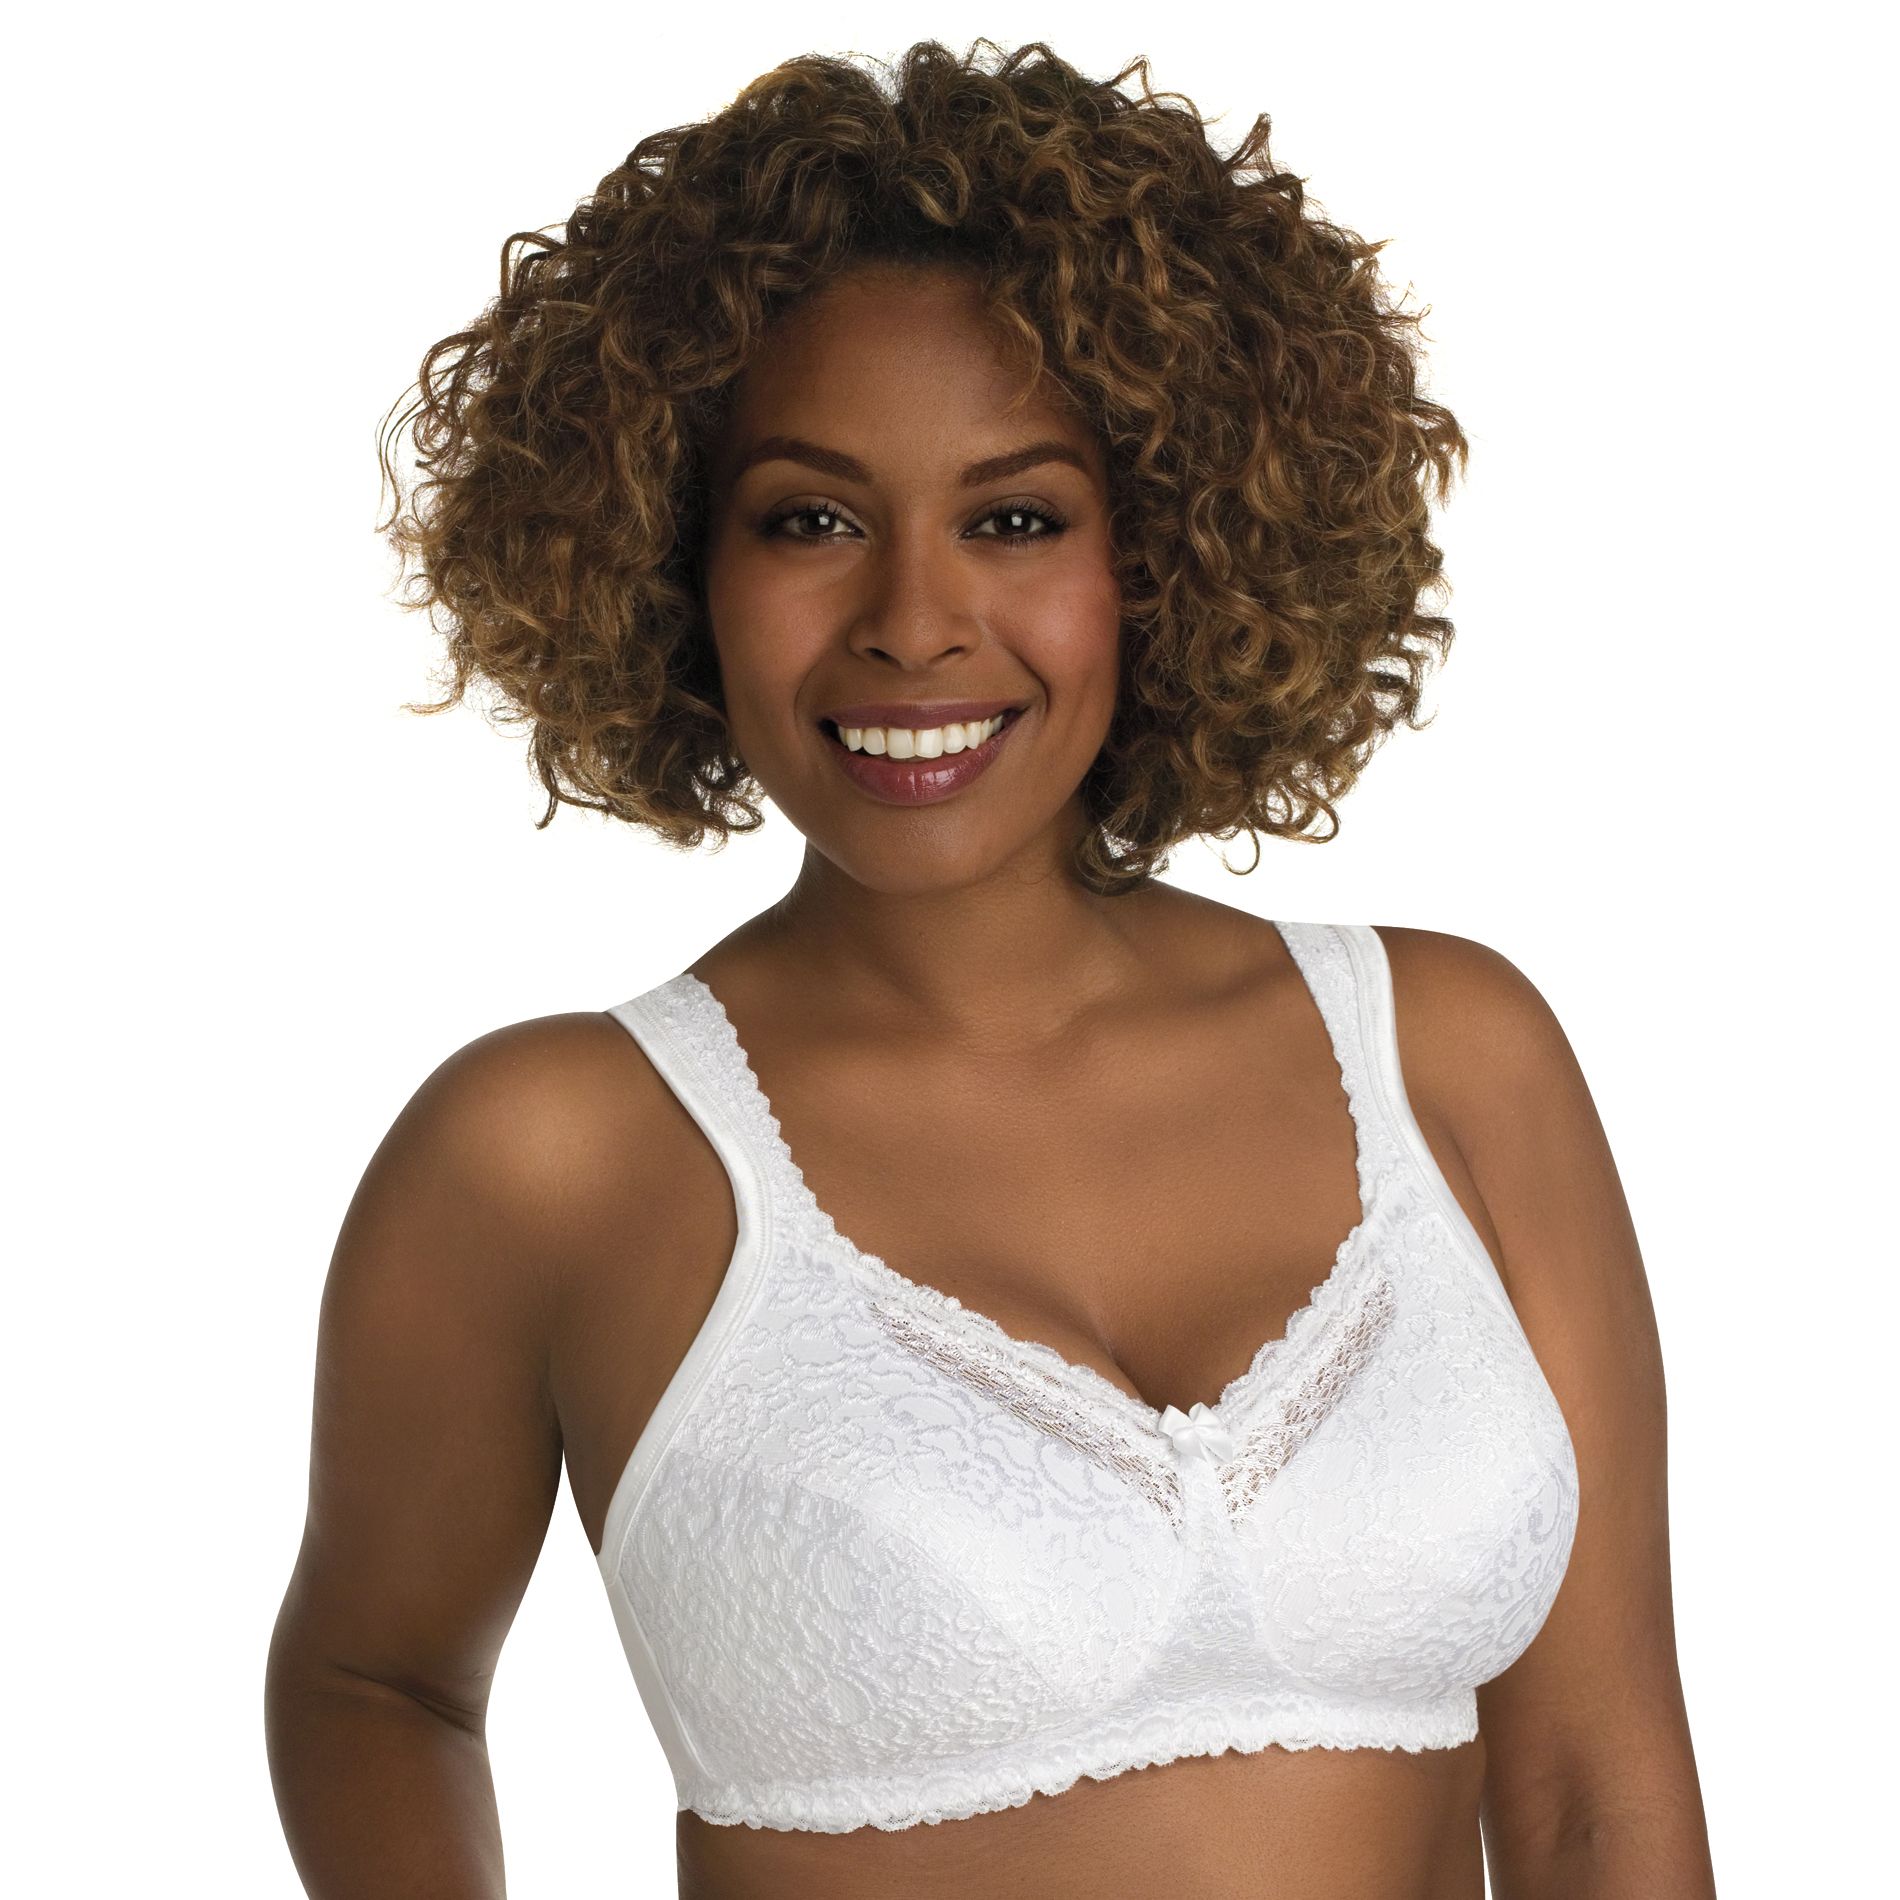 Playtex 18 Hour Breathable Comfort Lace Bra 